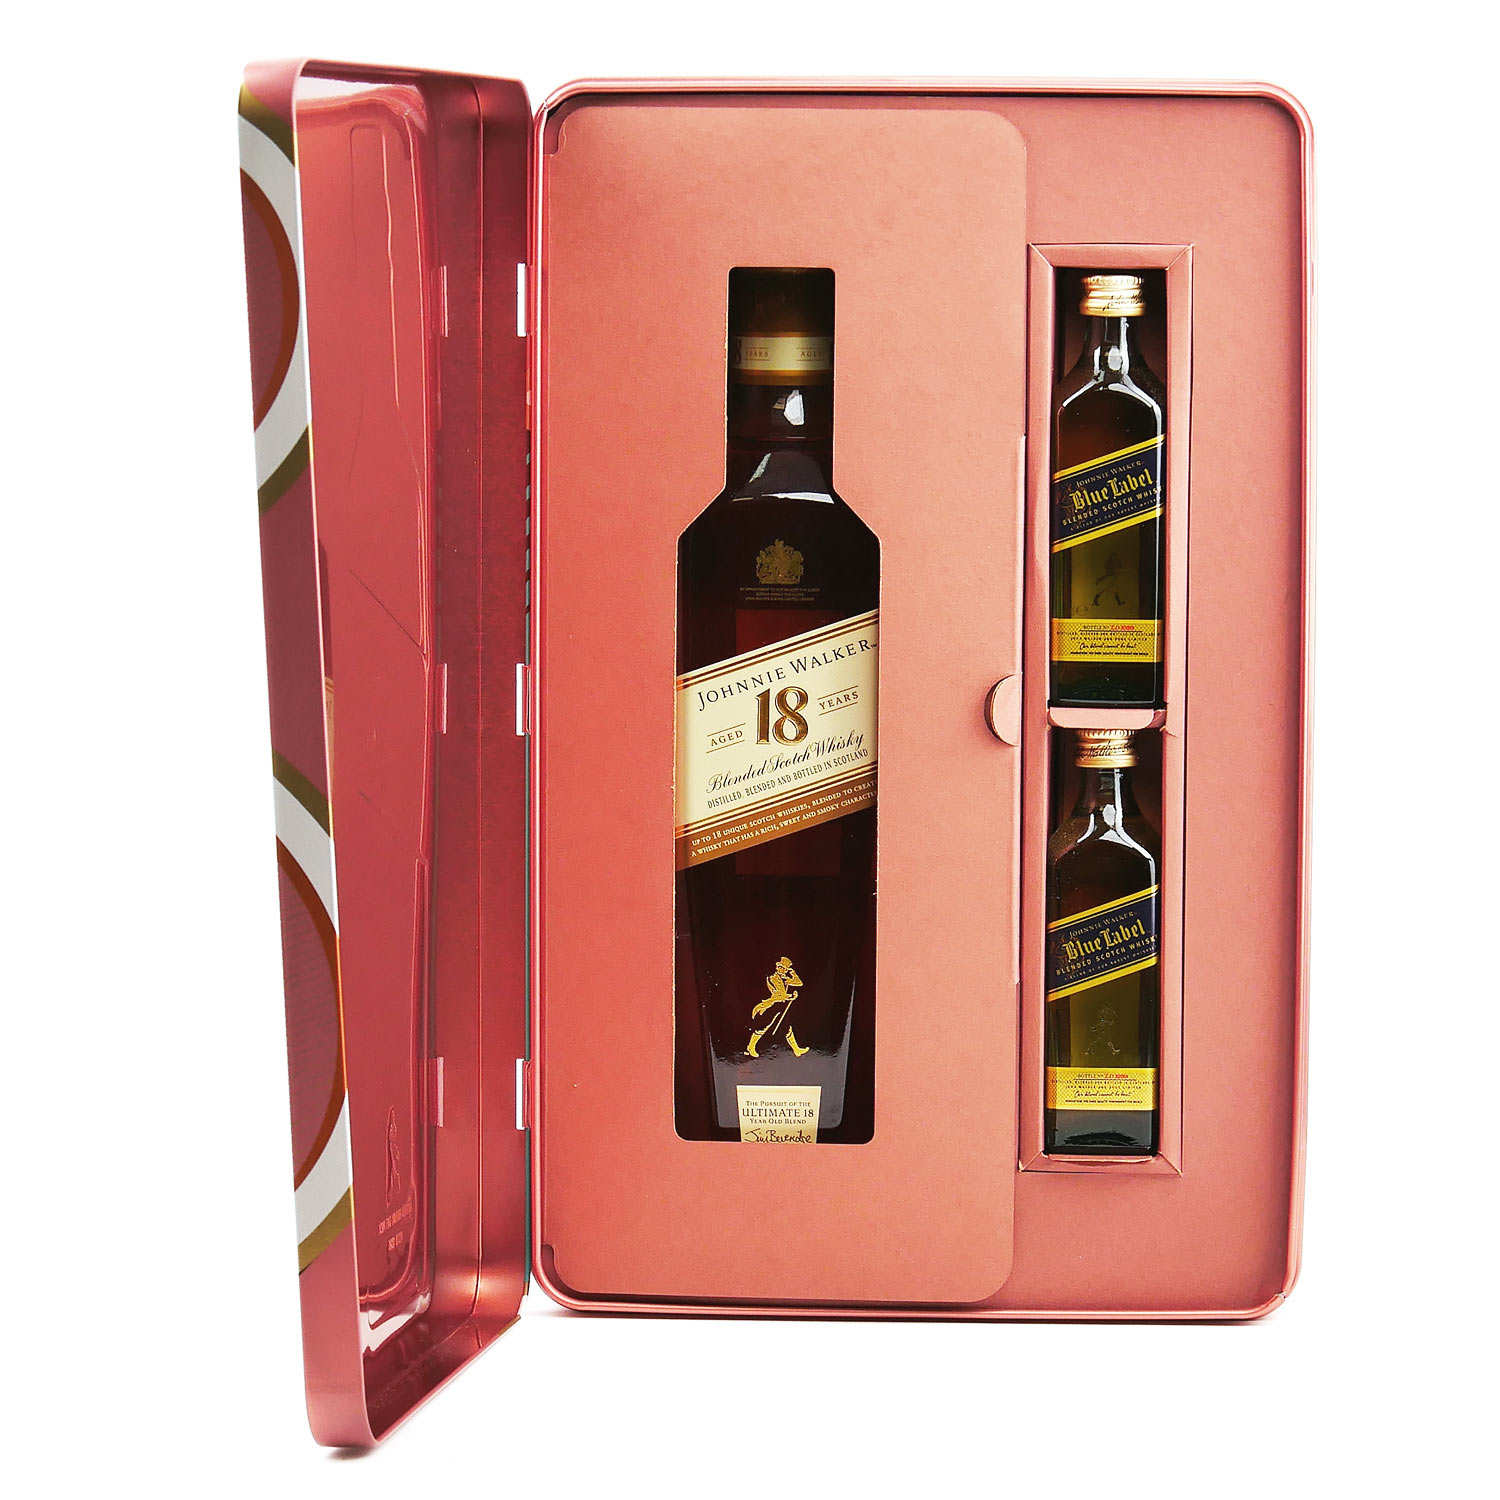 Johnnie Walker Collection Pack (4 x 200 ml) - Send Gifts and Money to Nepal  Online from www.muncha.com